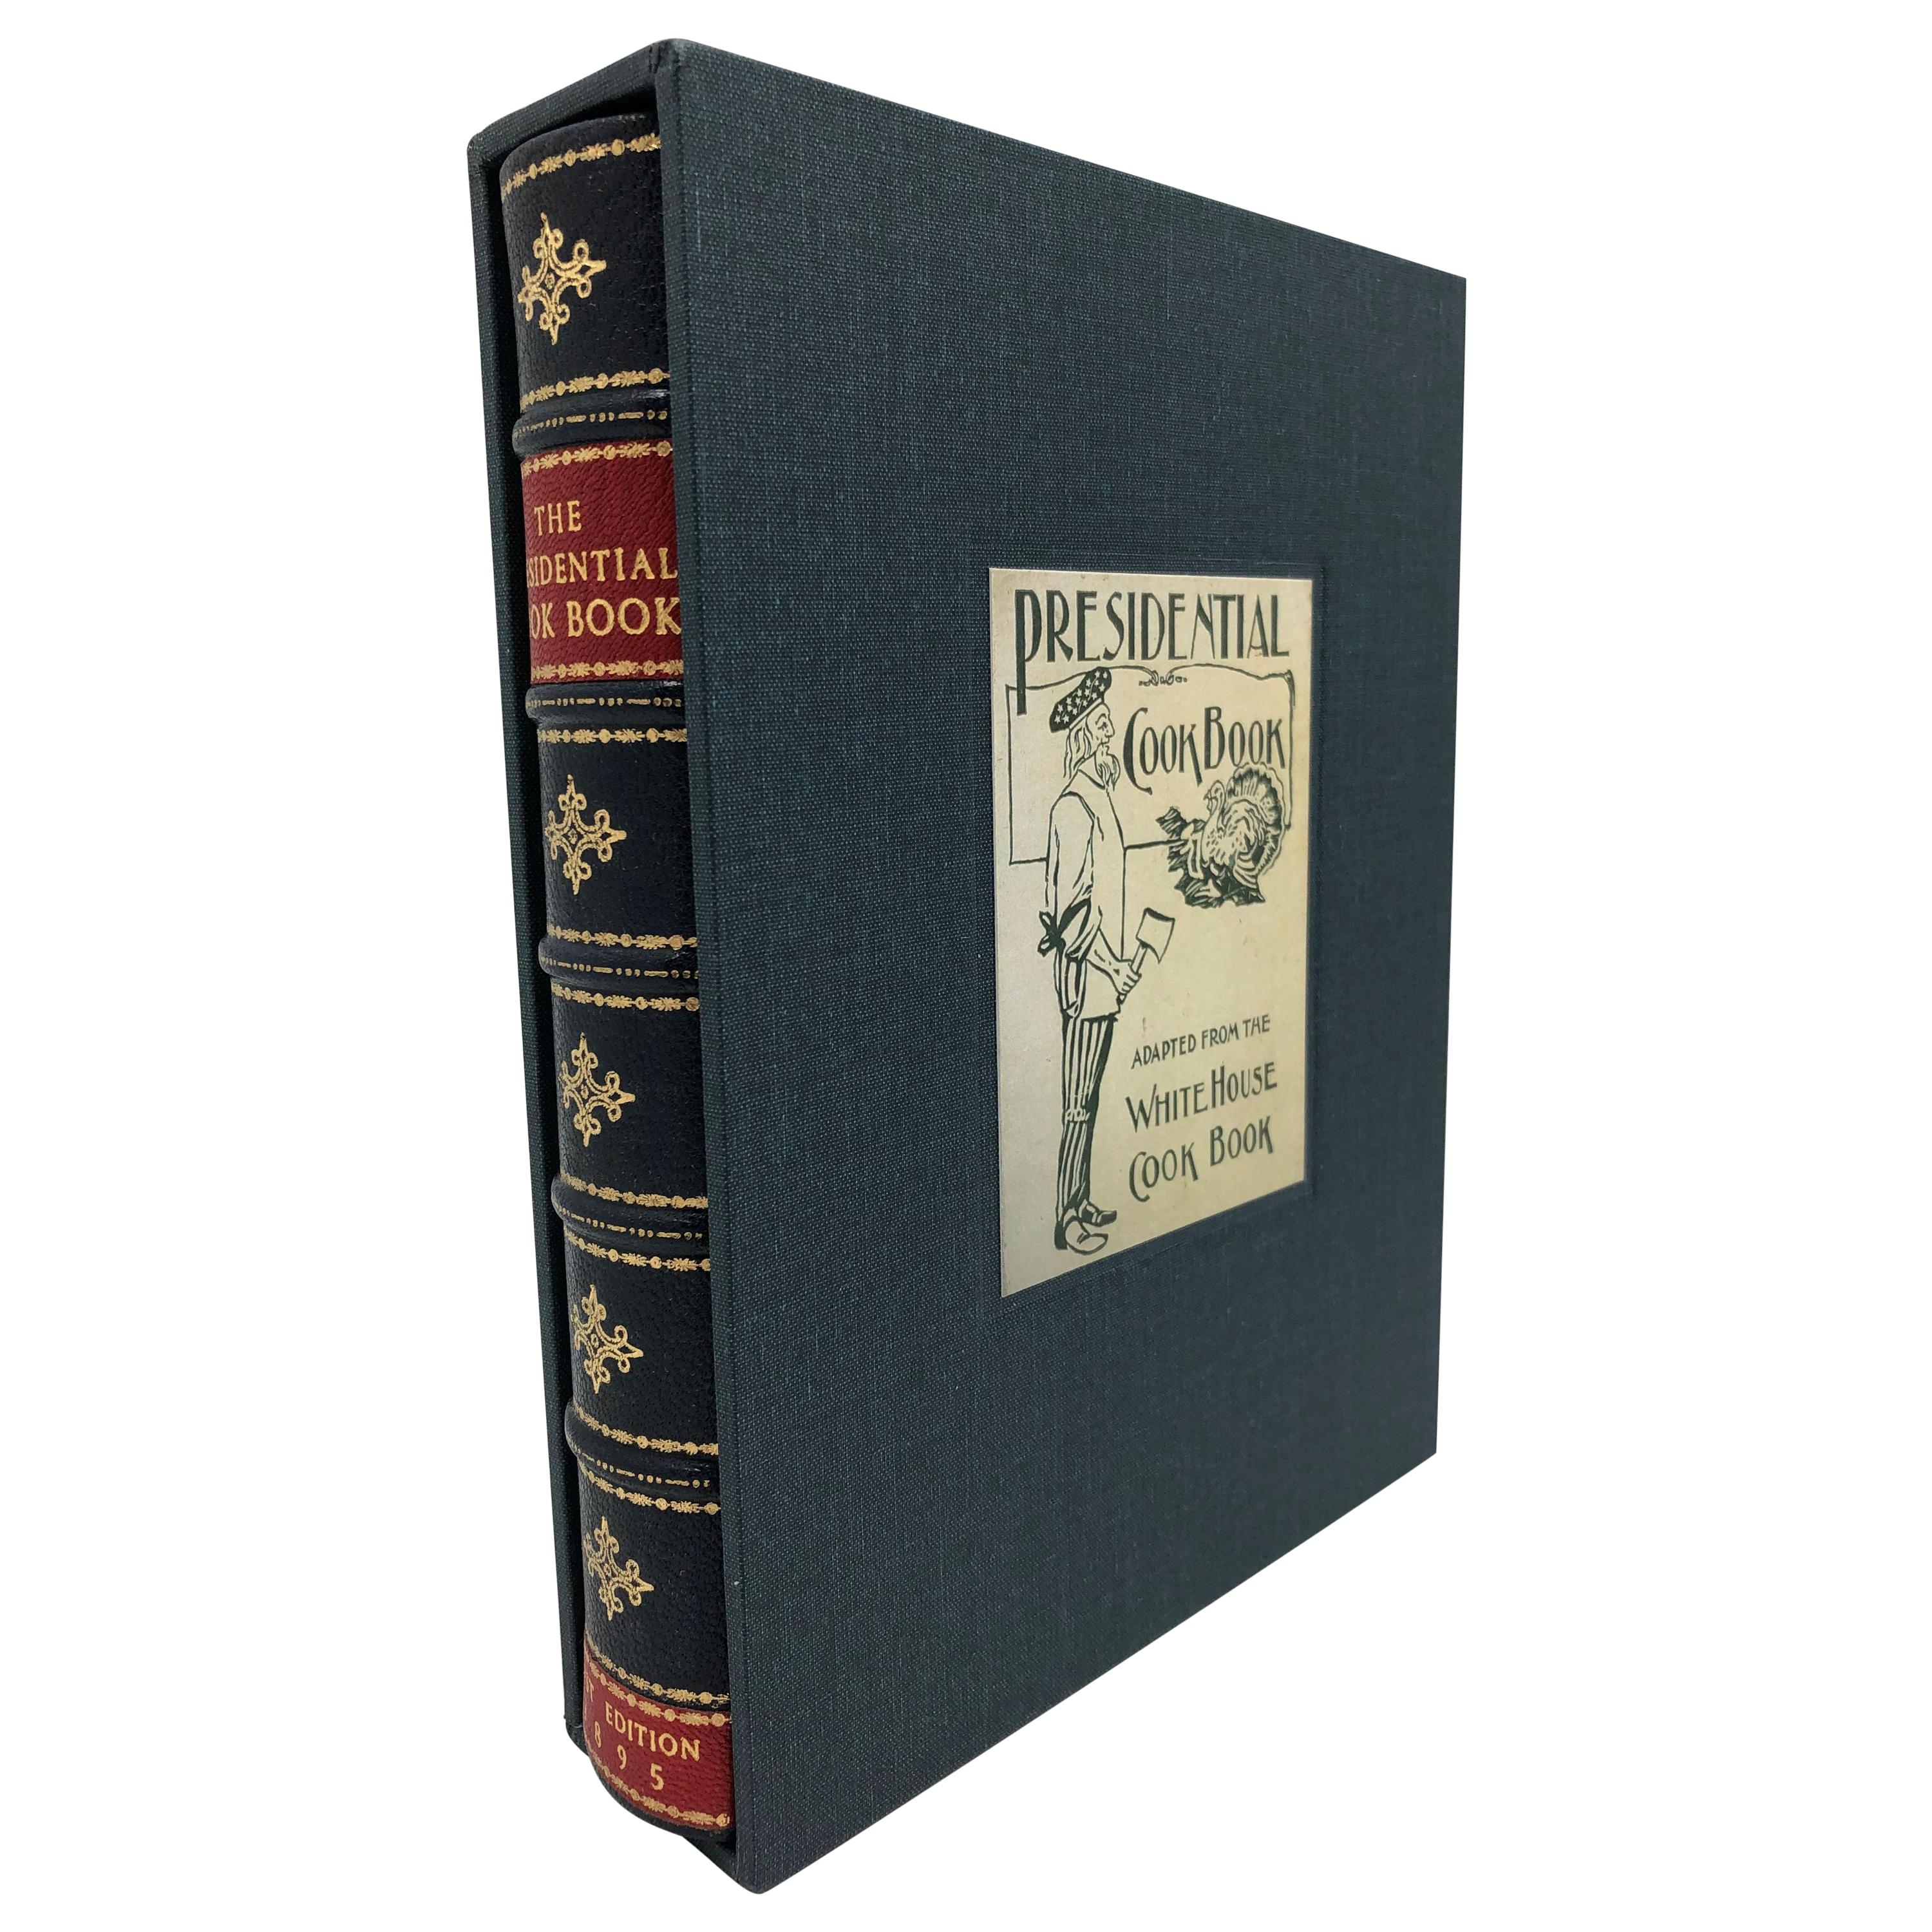 "The Presidential Cook Book" First Edition, 1895